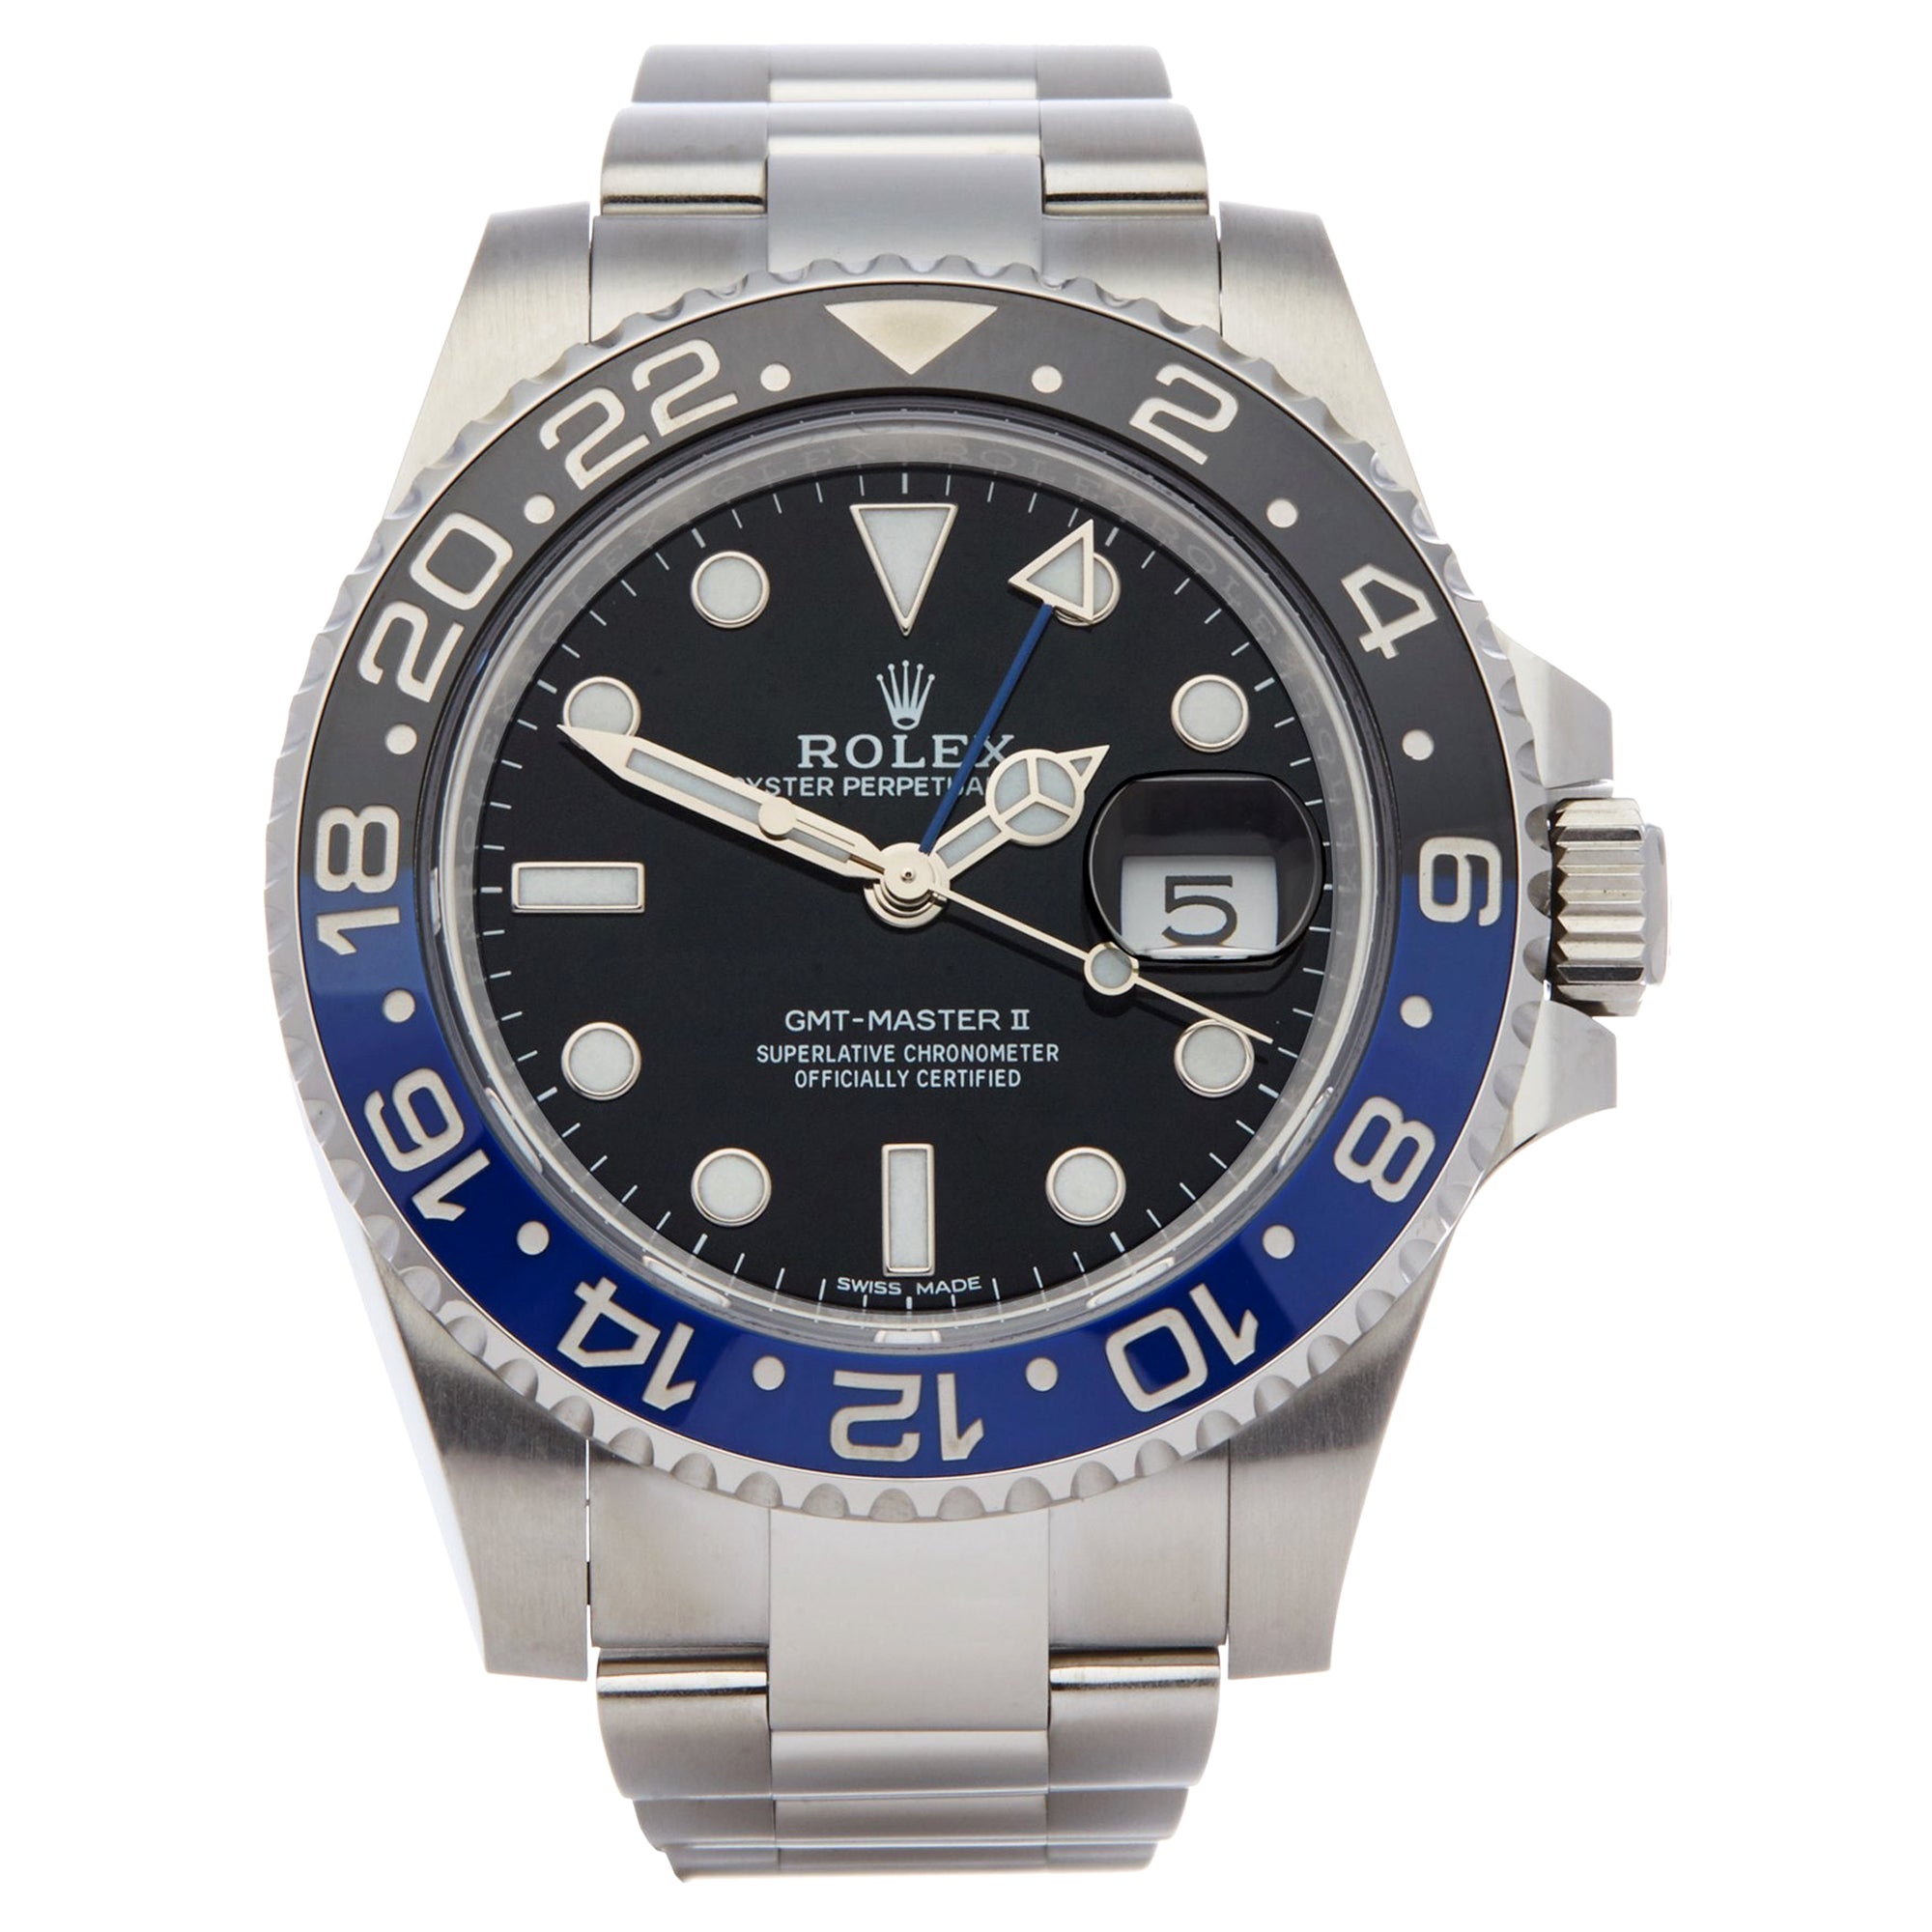 Men's Rolex GMT-Master II Watch 16713 For Sale at 1stDibs